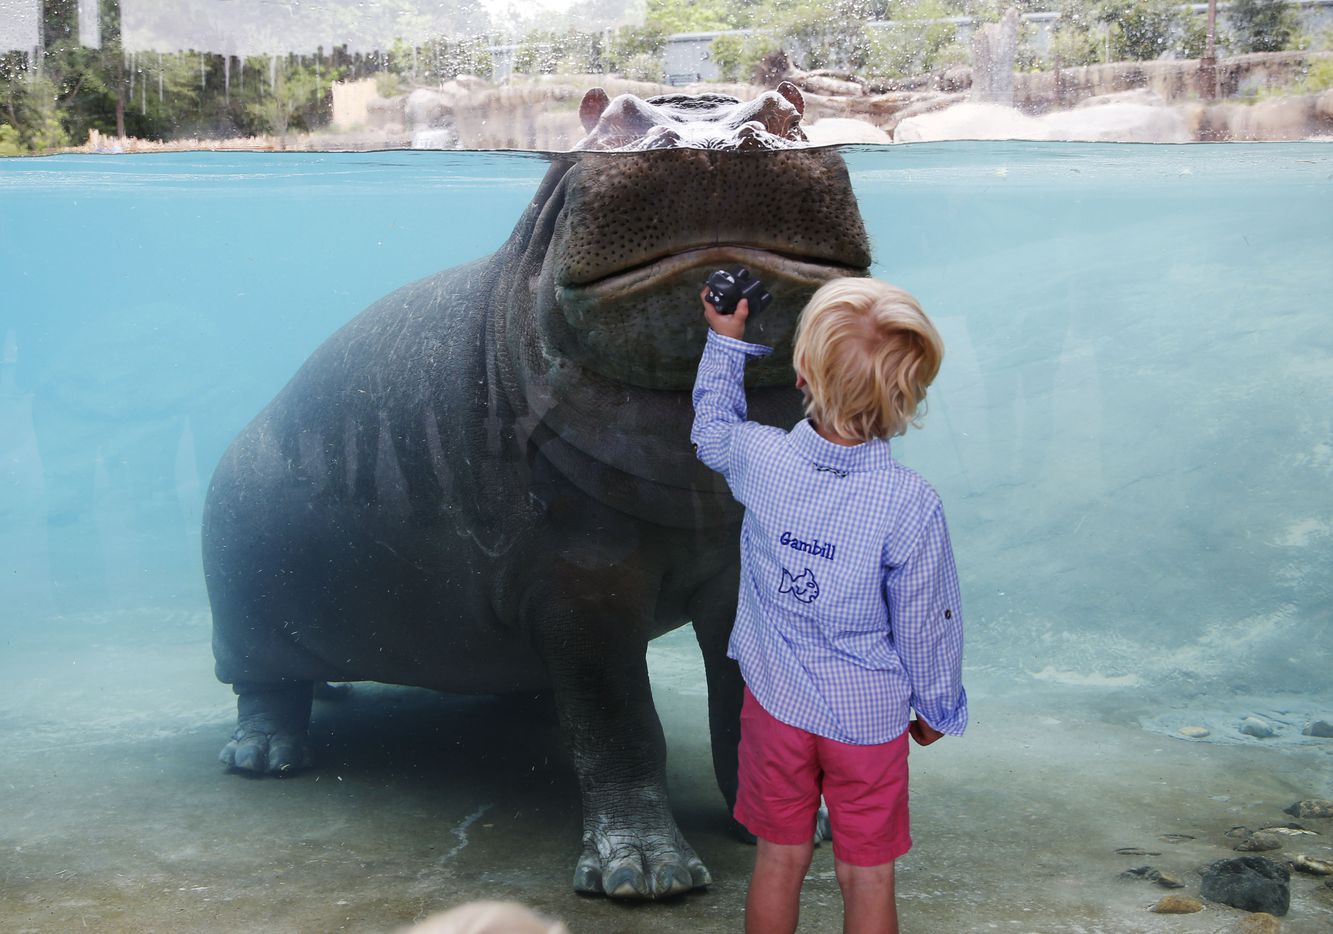 Gambill Whitsitt, 3, got a good look at Adhama during the grand opening of the Dallas Zoo's...